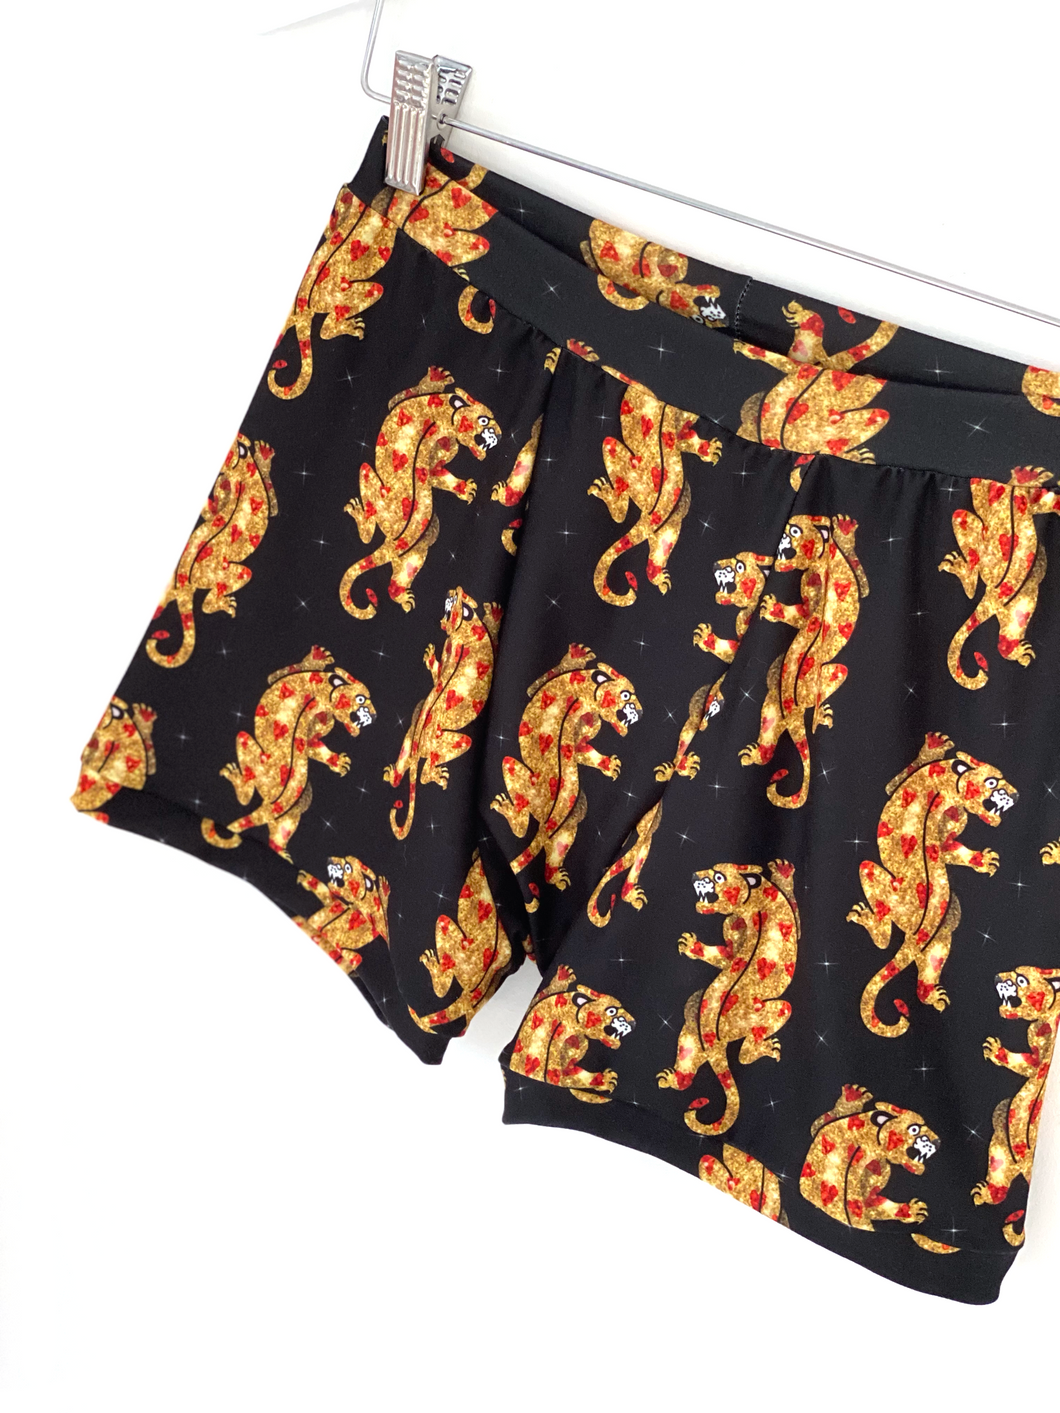 Mystery adult boxers